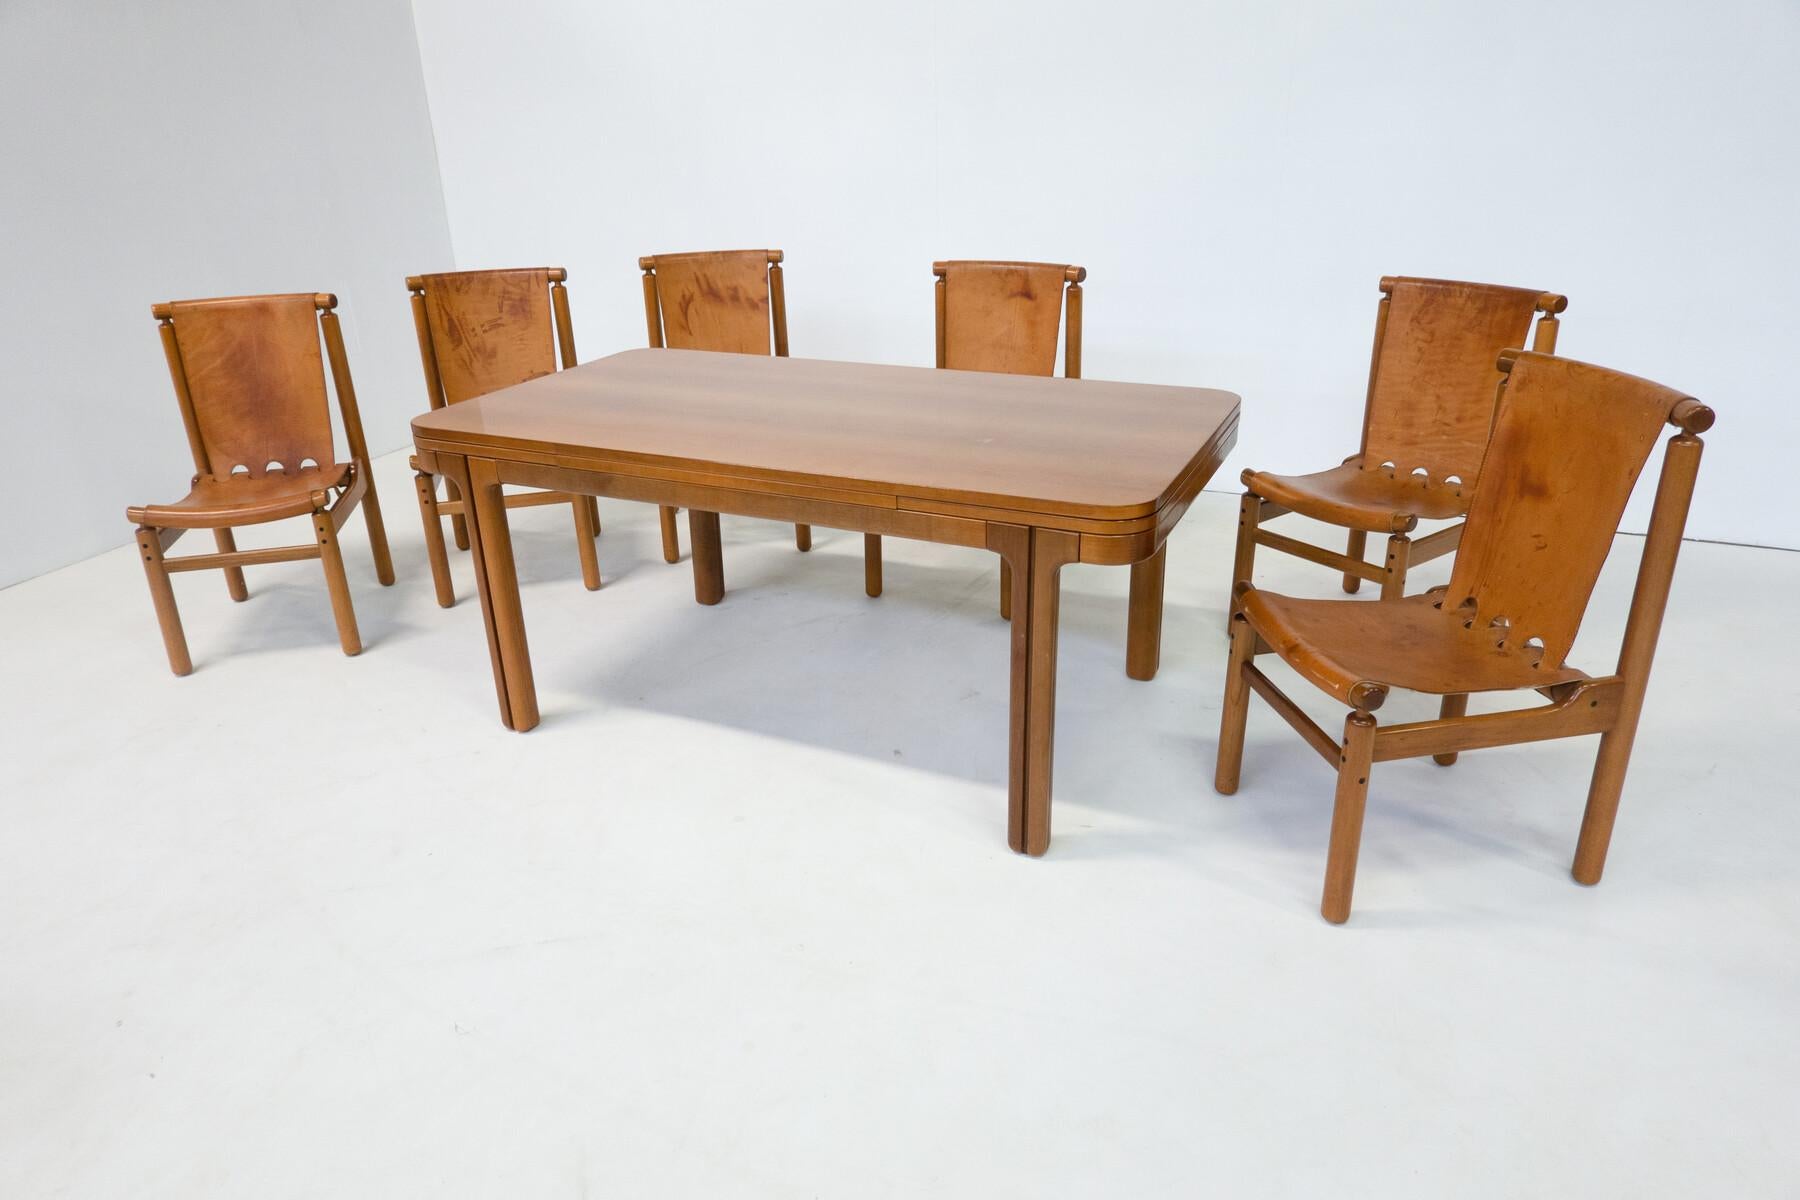 Mid-Century Modern Extendable Dining Table by Llmari Tapiovaara, Finland, 1950s For Sale 3